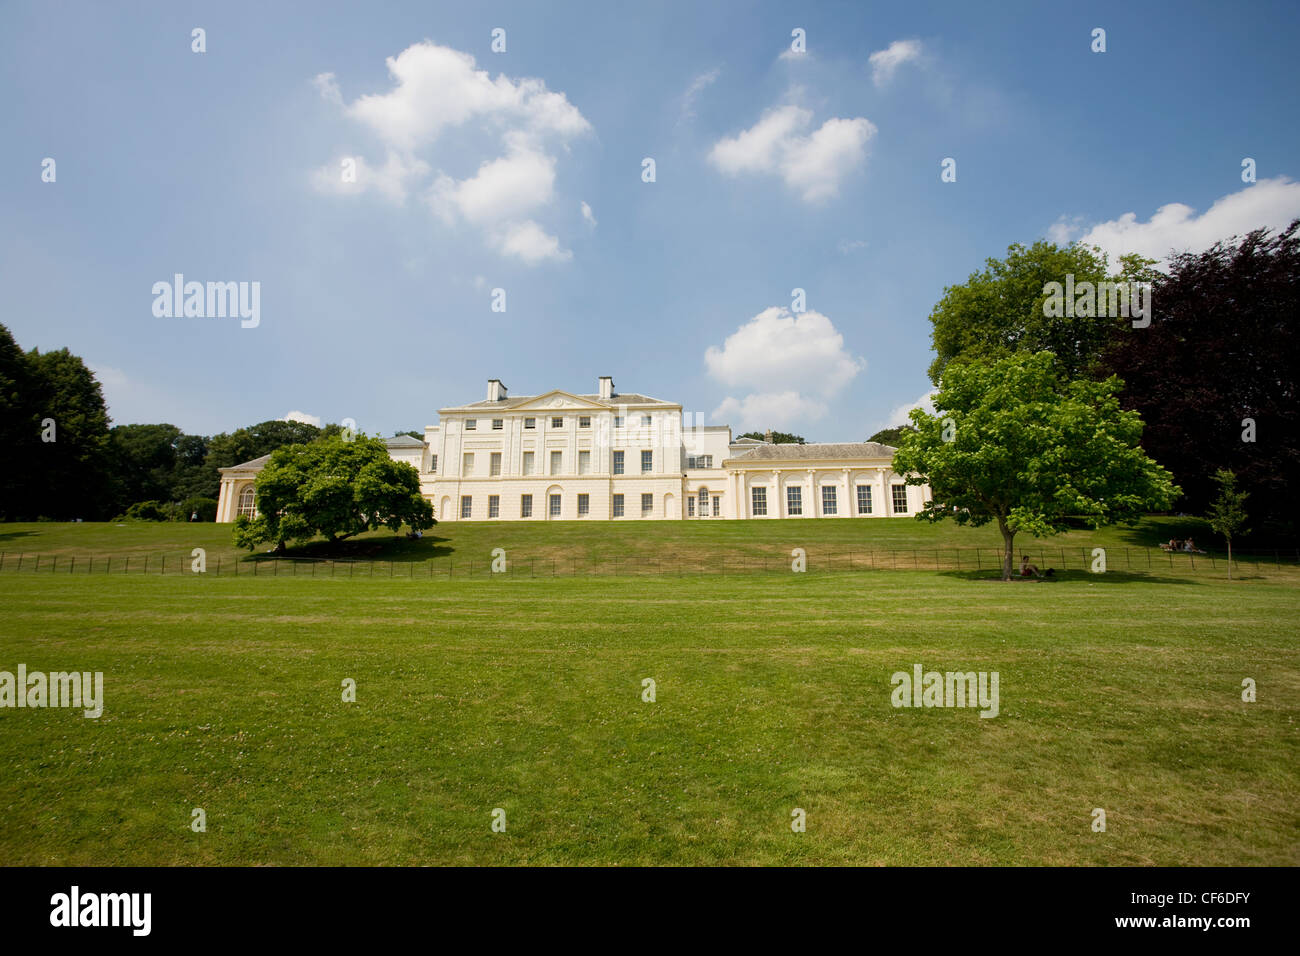 Kenwood House also known as the Iveagh Bequest, a 17th century former stately home set in tranquil parkland by Hampstead Heath. Stock Photo